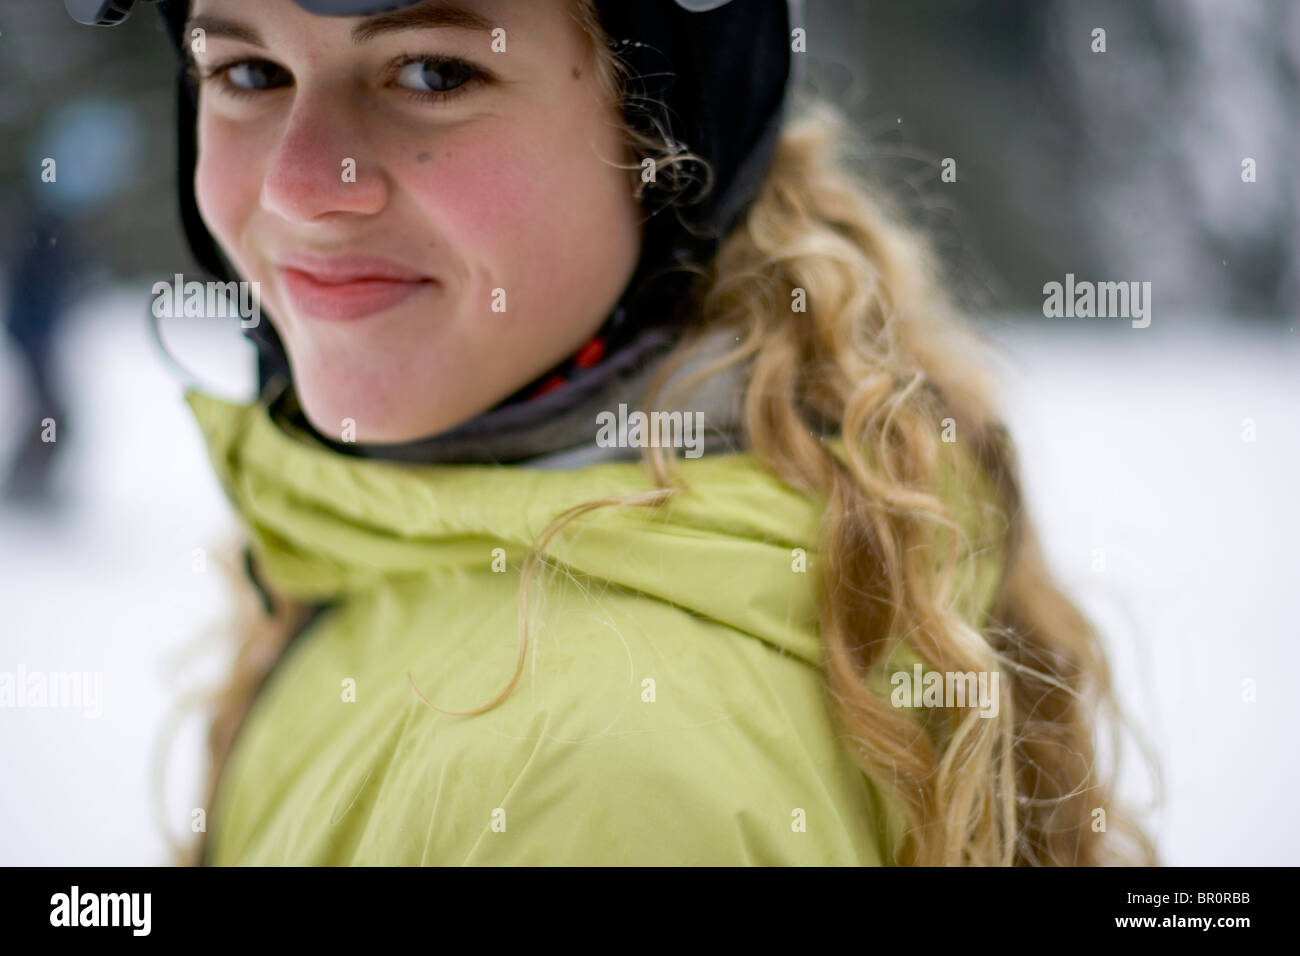 A young woman on vacation snowboarding at Sunday River ski resort in Bethel, Maine. Stock Photo